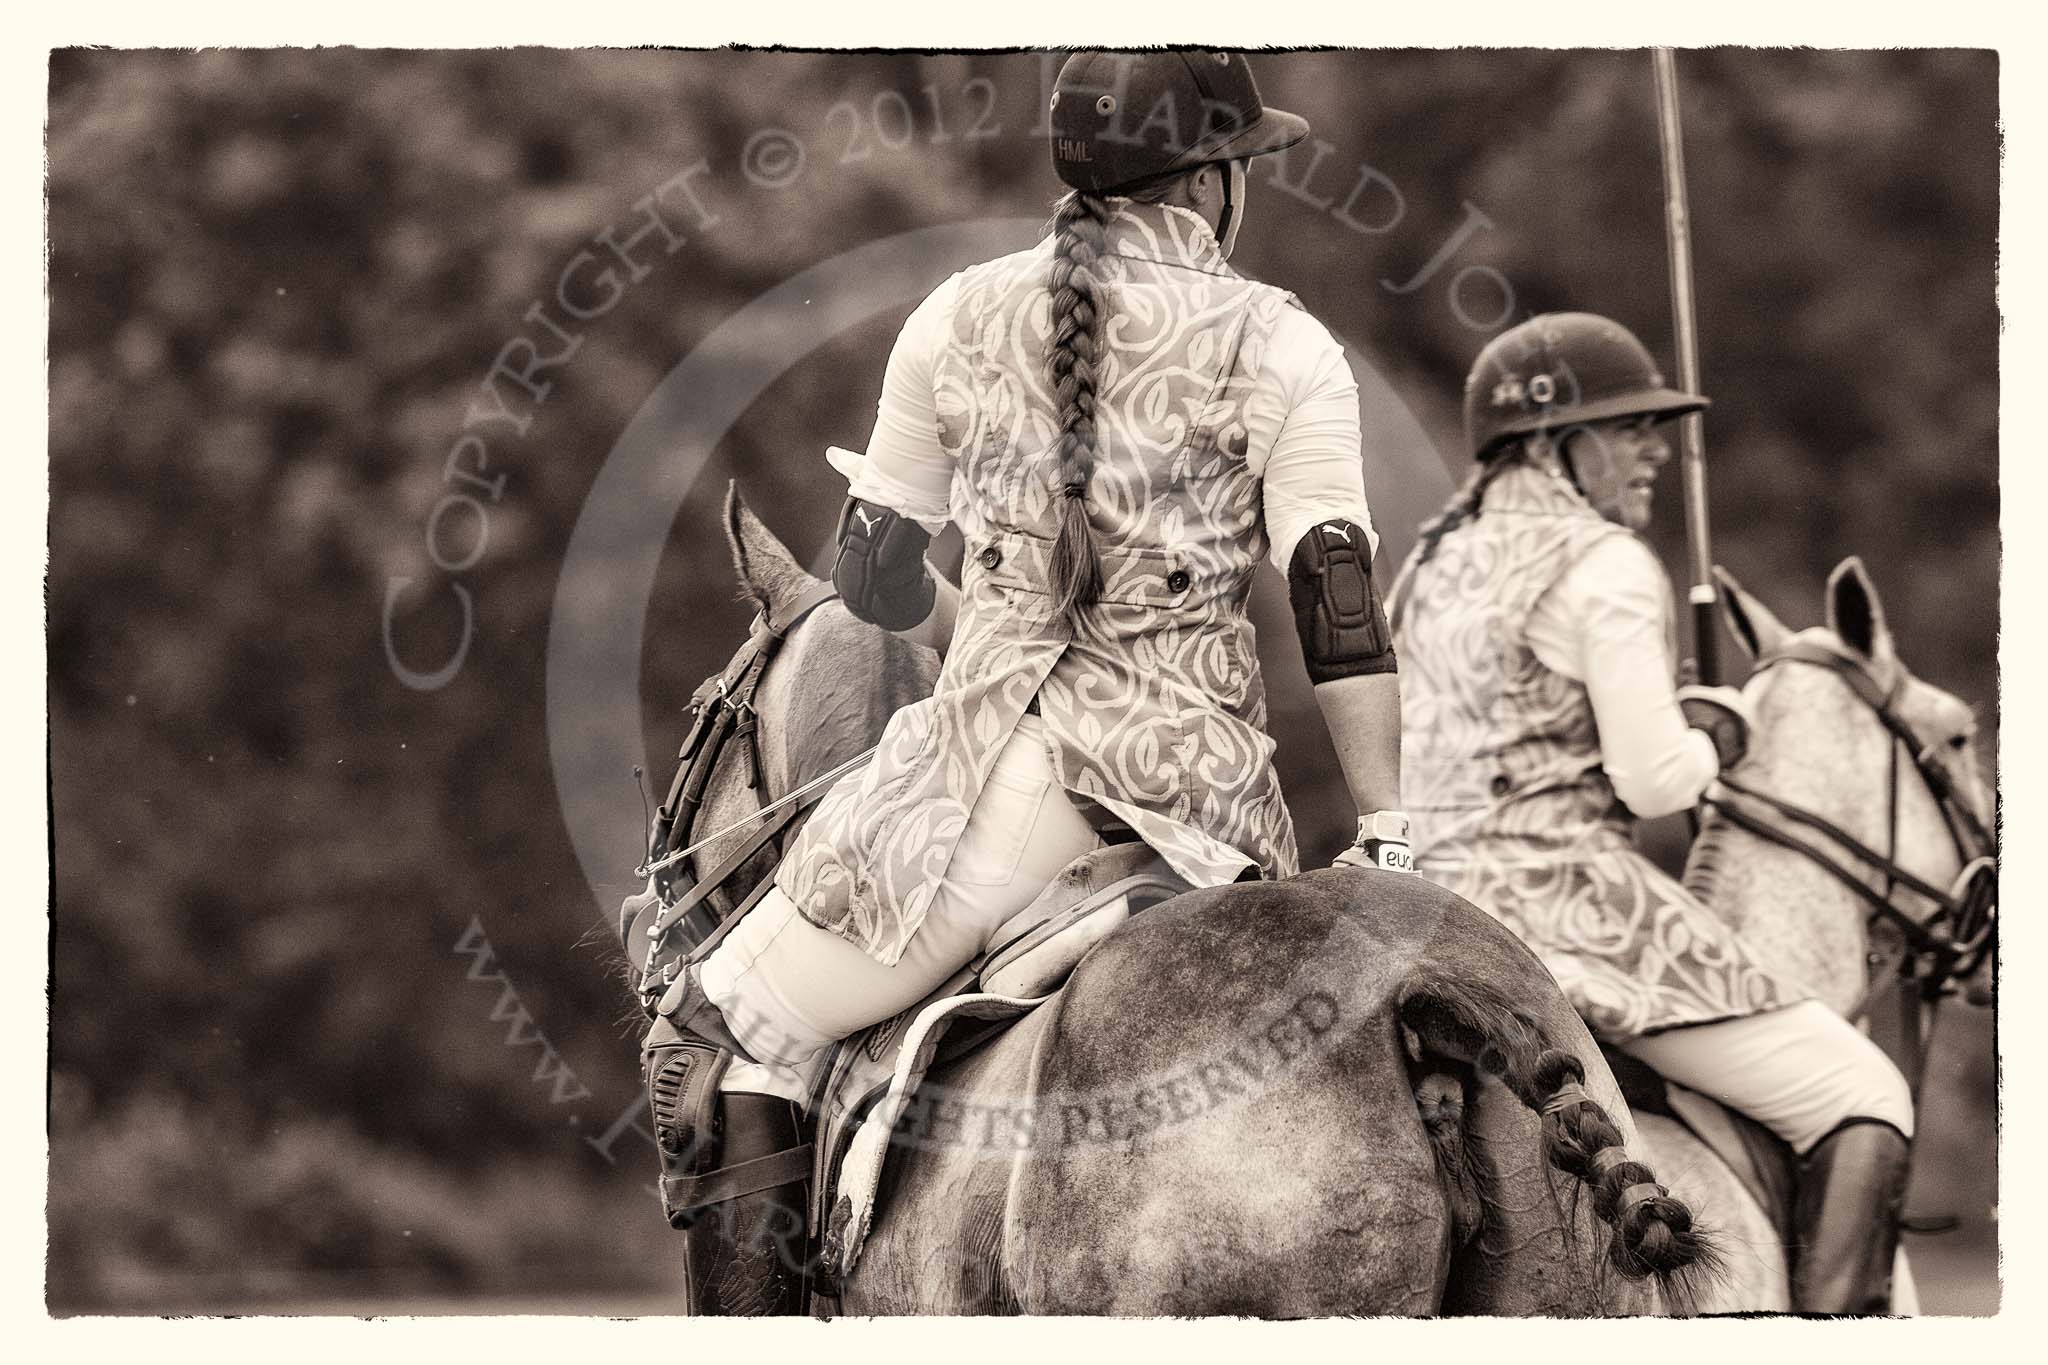 7th Heritage Polo Cup semi-finals: : The Amazons of Polo Team sponsored by Polistas - Heloise Lorentzen & Barbara P Zingg..
Hurtwood Park Polo Club,
Ewhurst Green,
Surrey,
United Kingdom,
on 04 August 2012 at 13:13, image #109